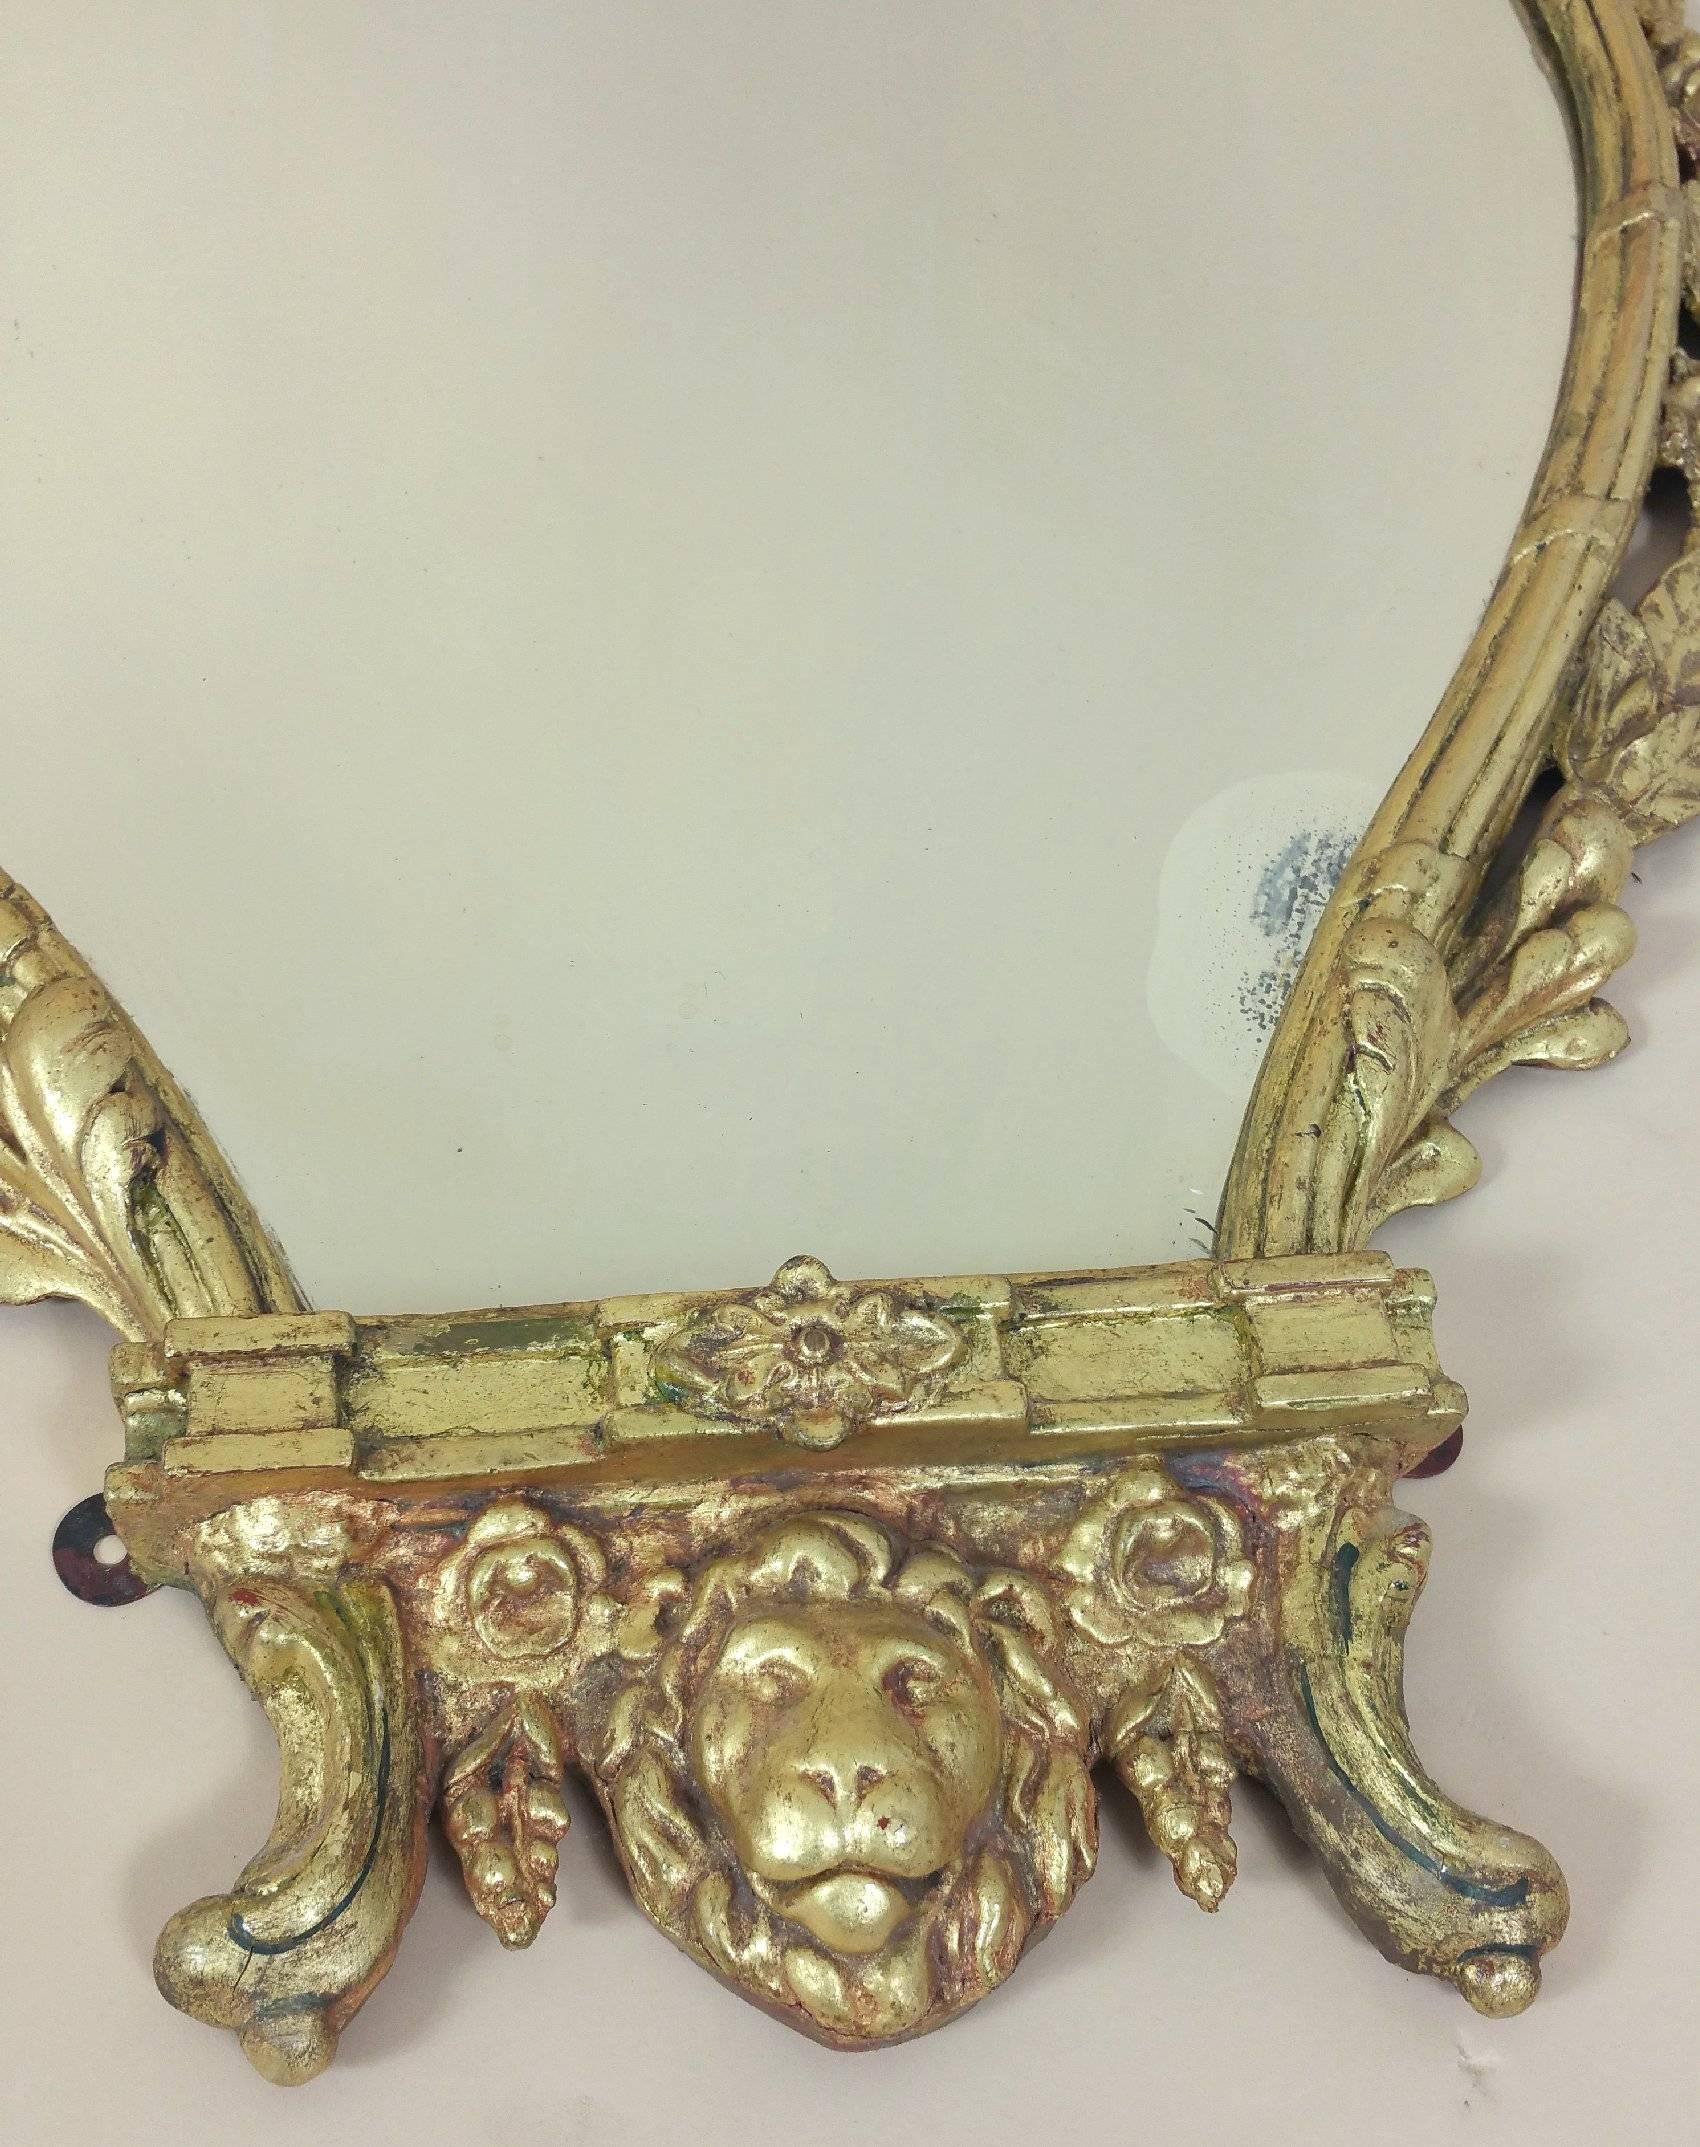 This magnificent and elegant pair of mid-19th century neoclassical gilt wall mirrors are nicely shaped and feature an ornate carved floral border detail with lion mask centerpieces. Each mirror measures 26 in – 66 cm wide, 3¾ in – 9.5 cm deep and 41